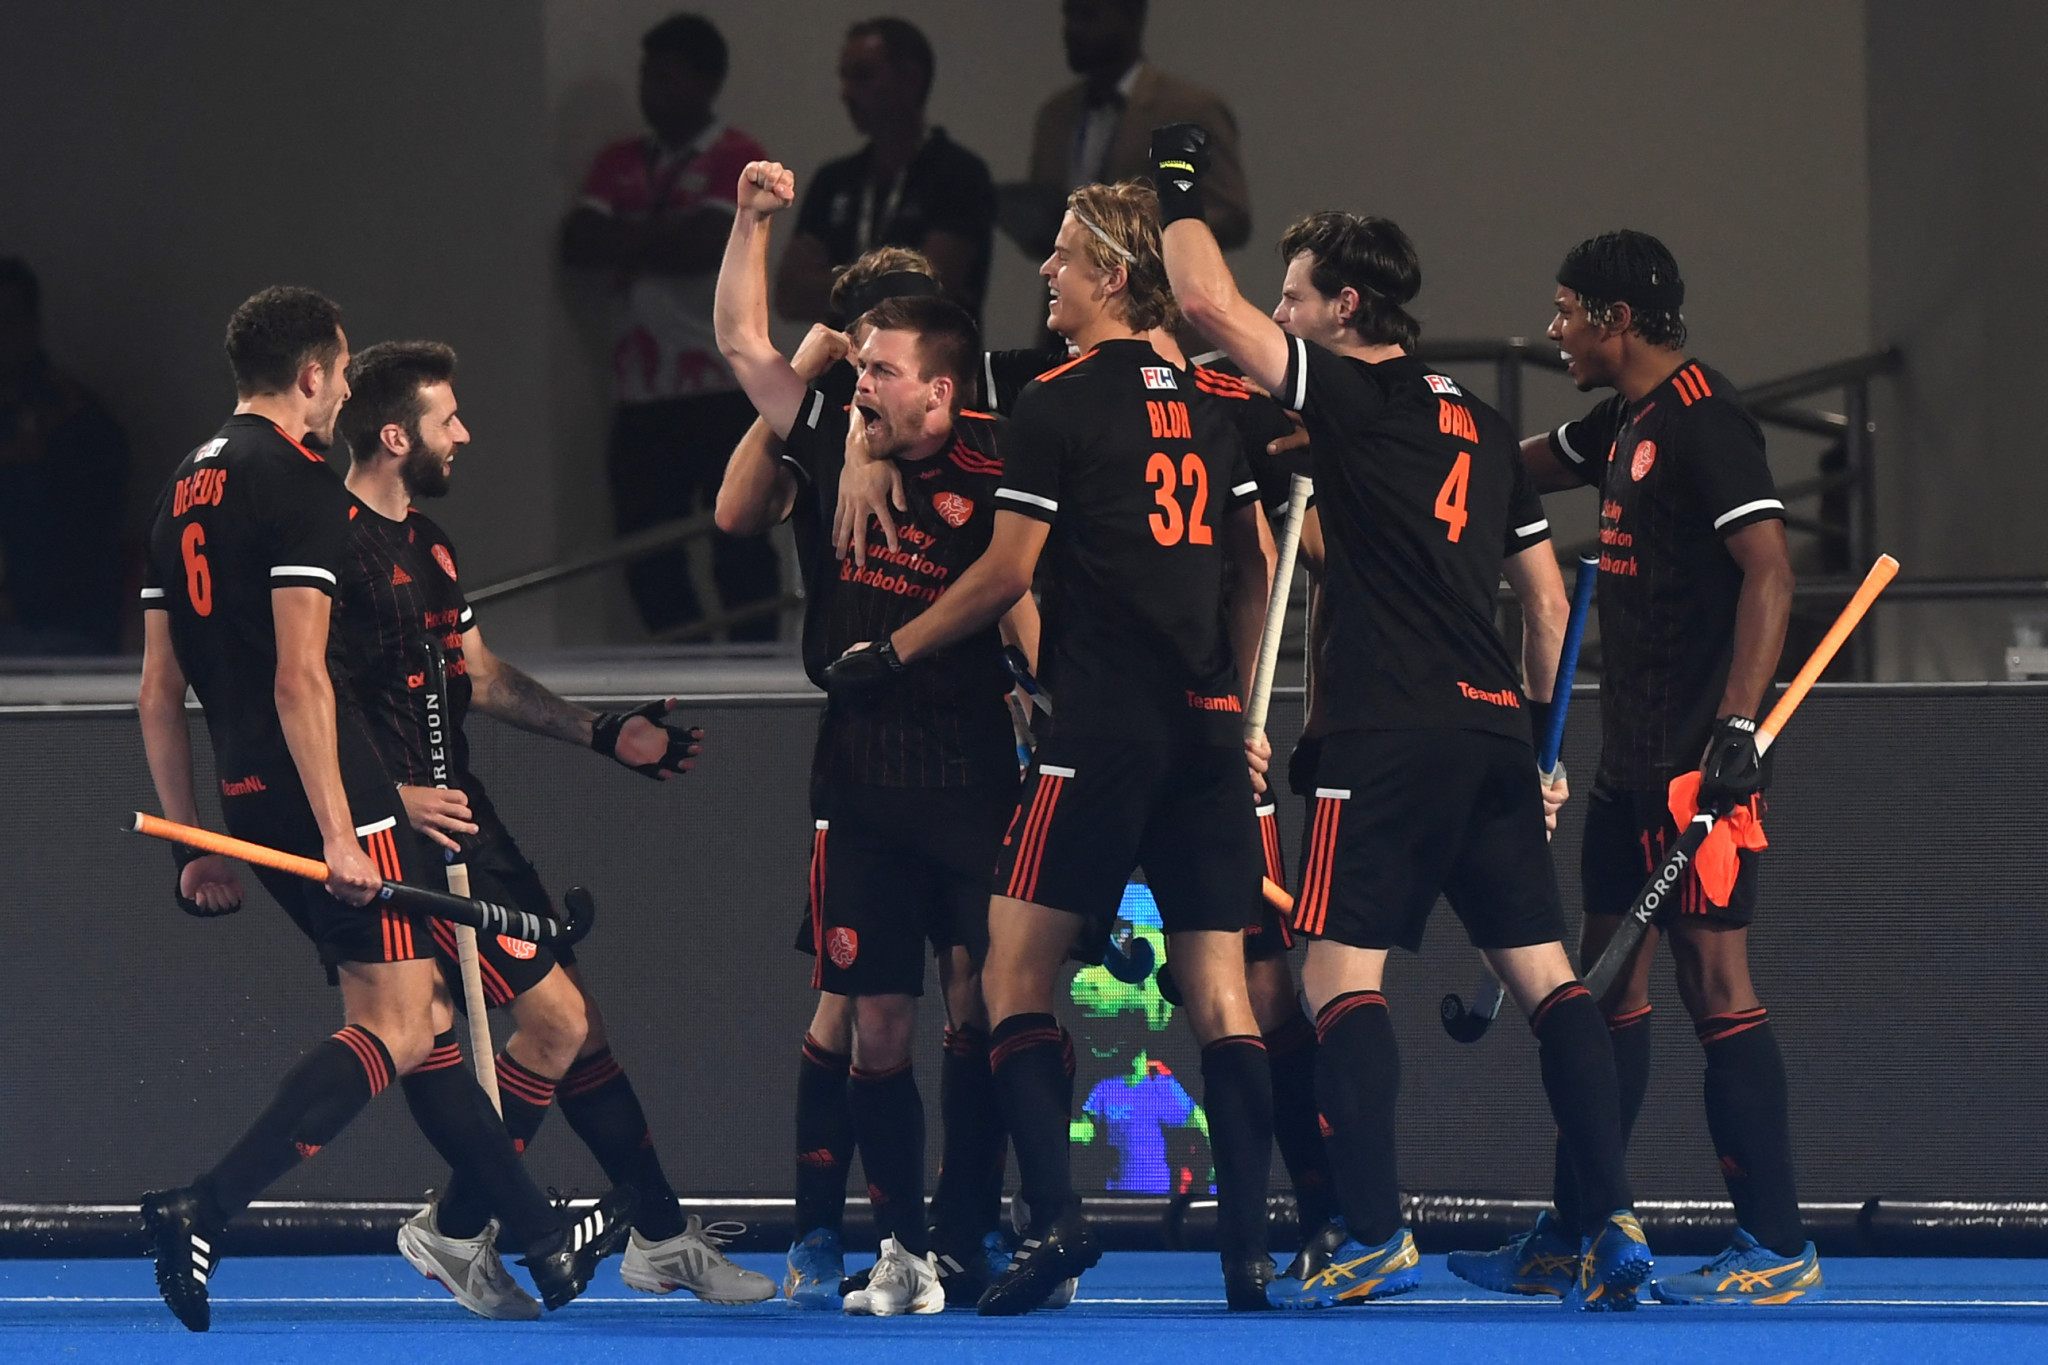 The Netherlands men's hockey team overtook Germany to claim first place in the FIH rankings ©Getty Images 